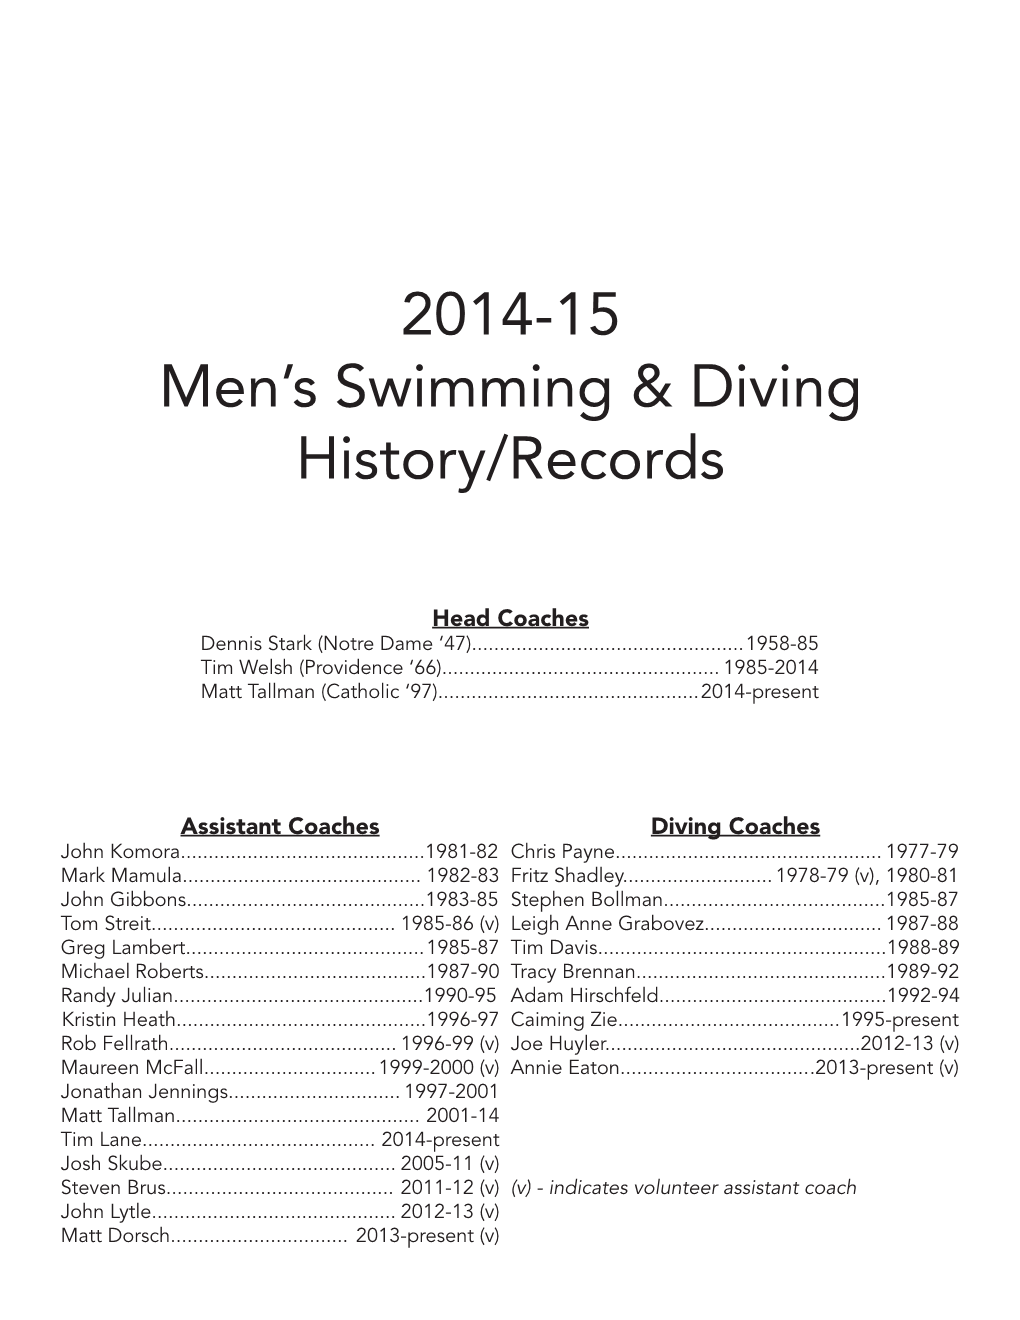 2014-15 Men's Swimming & Diving History/Records